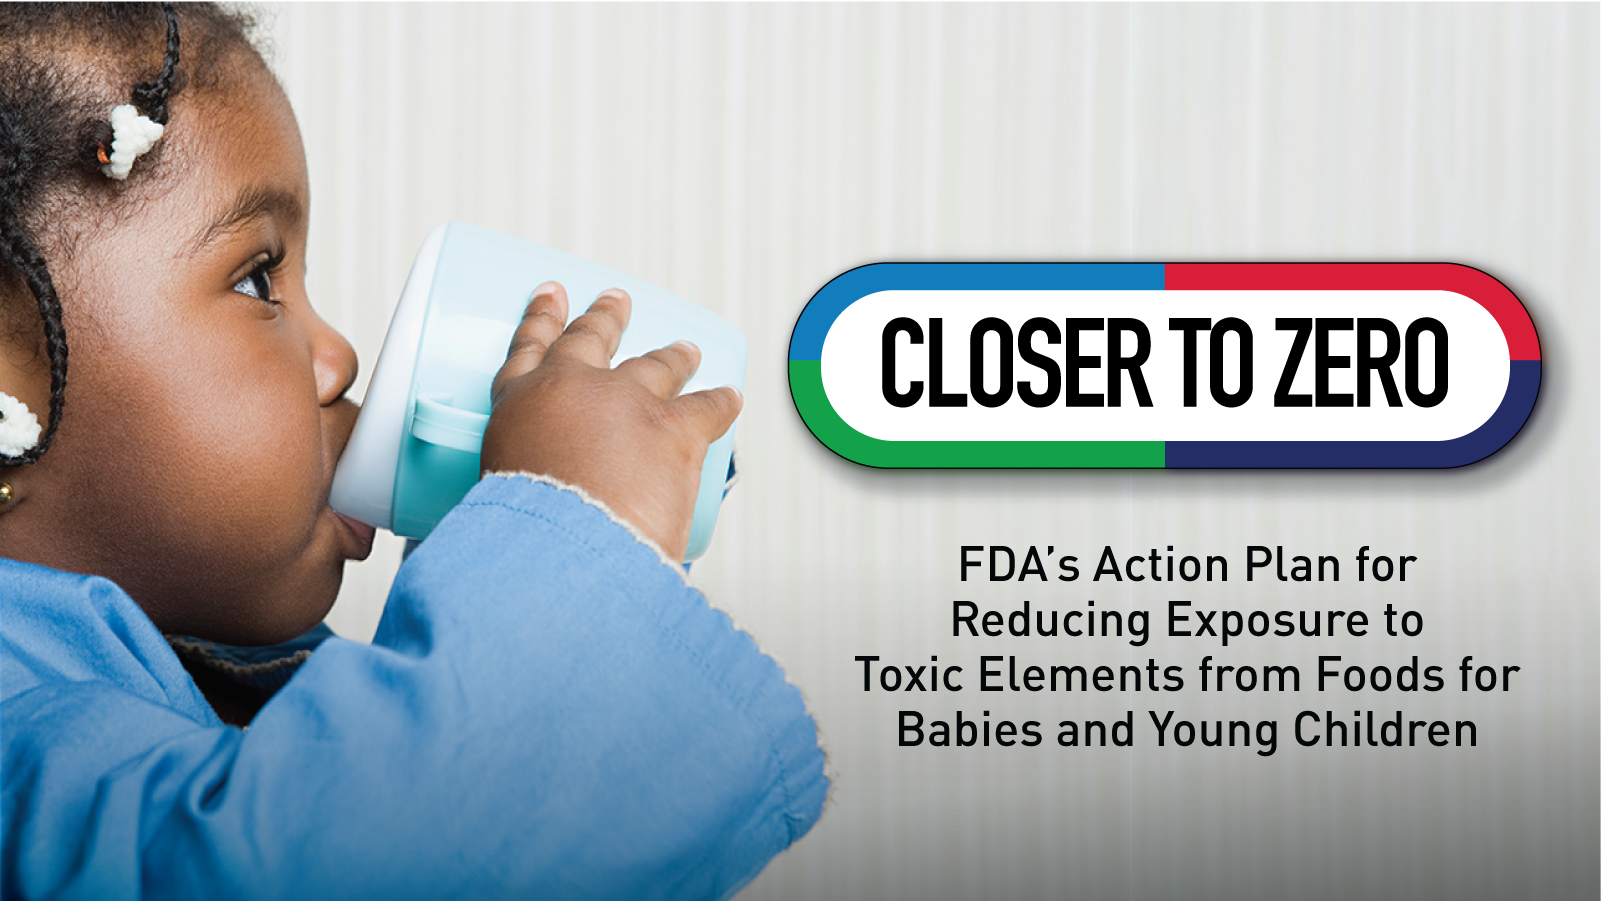 Closer to Zero: Reducing Exposure to Toxic Elements from Foods  for Babies and Young Children